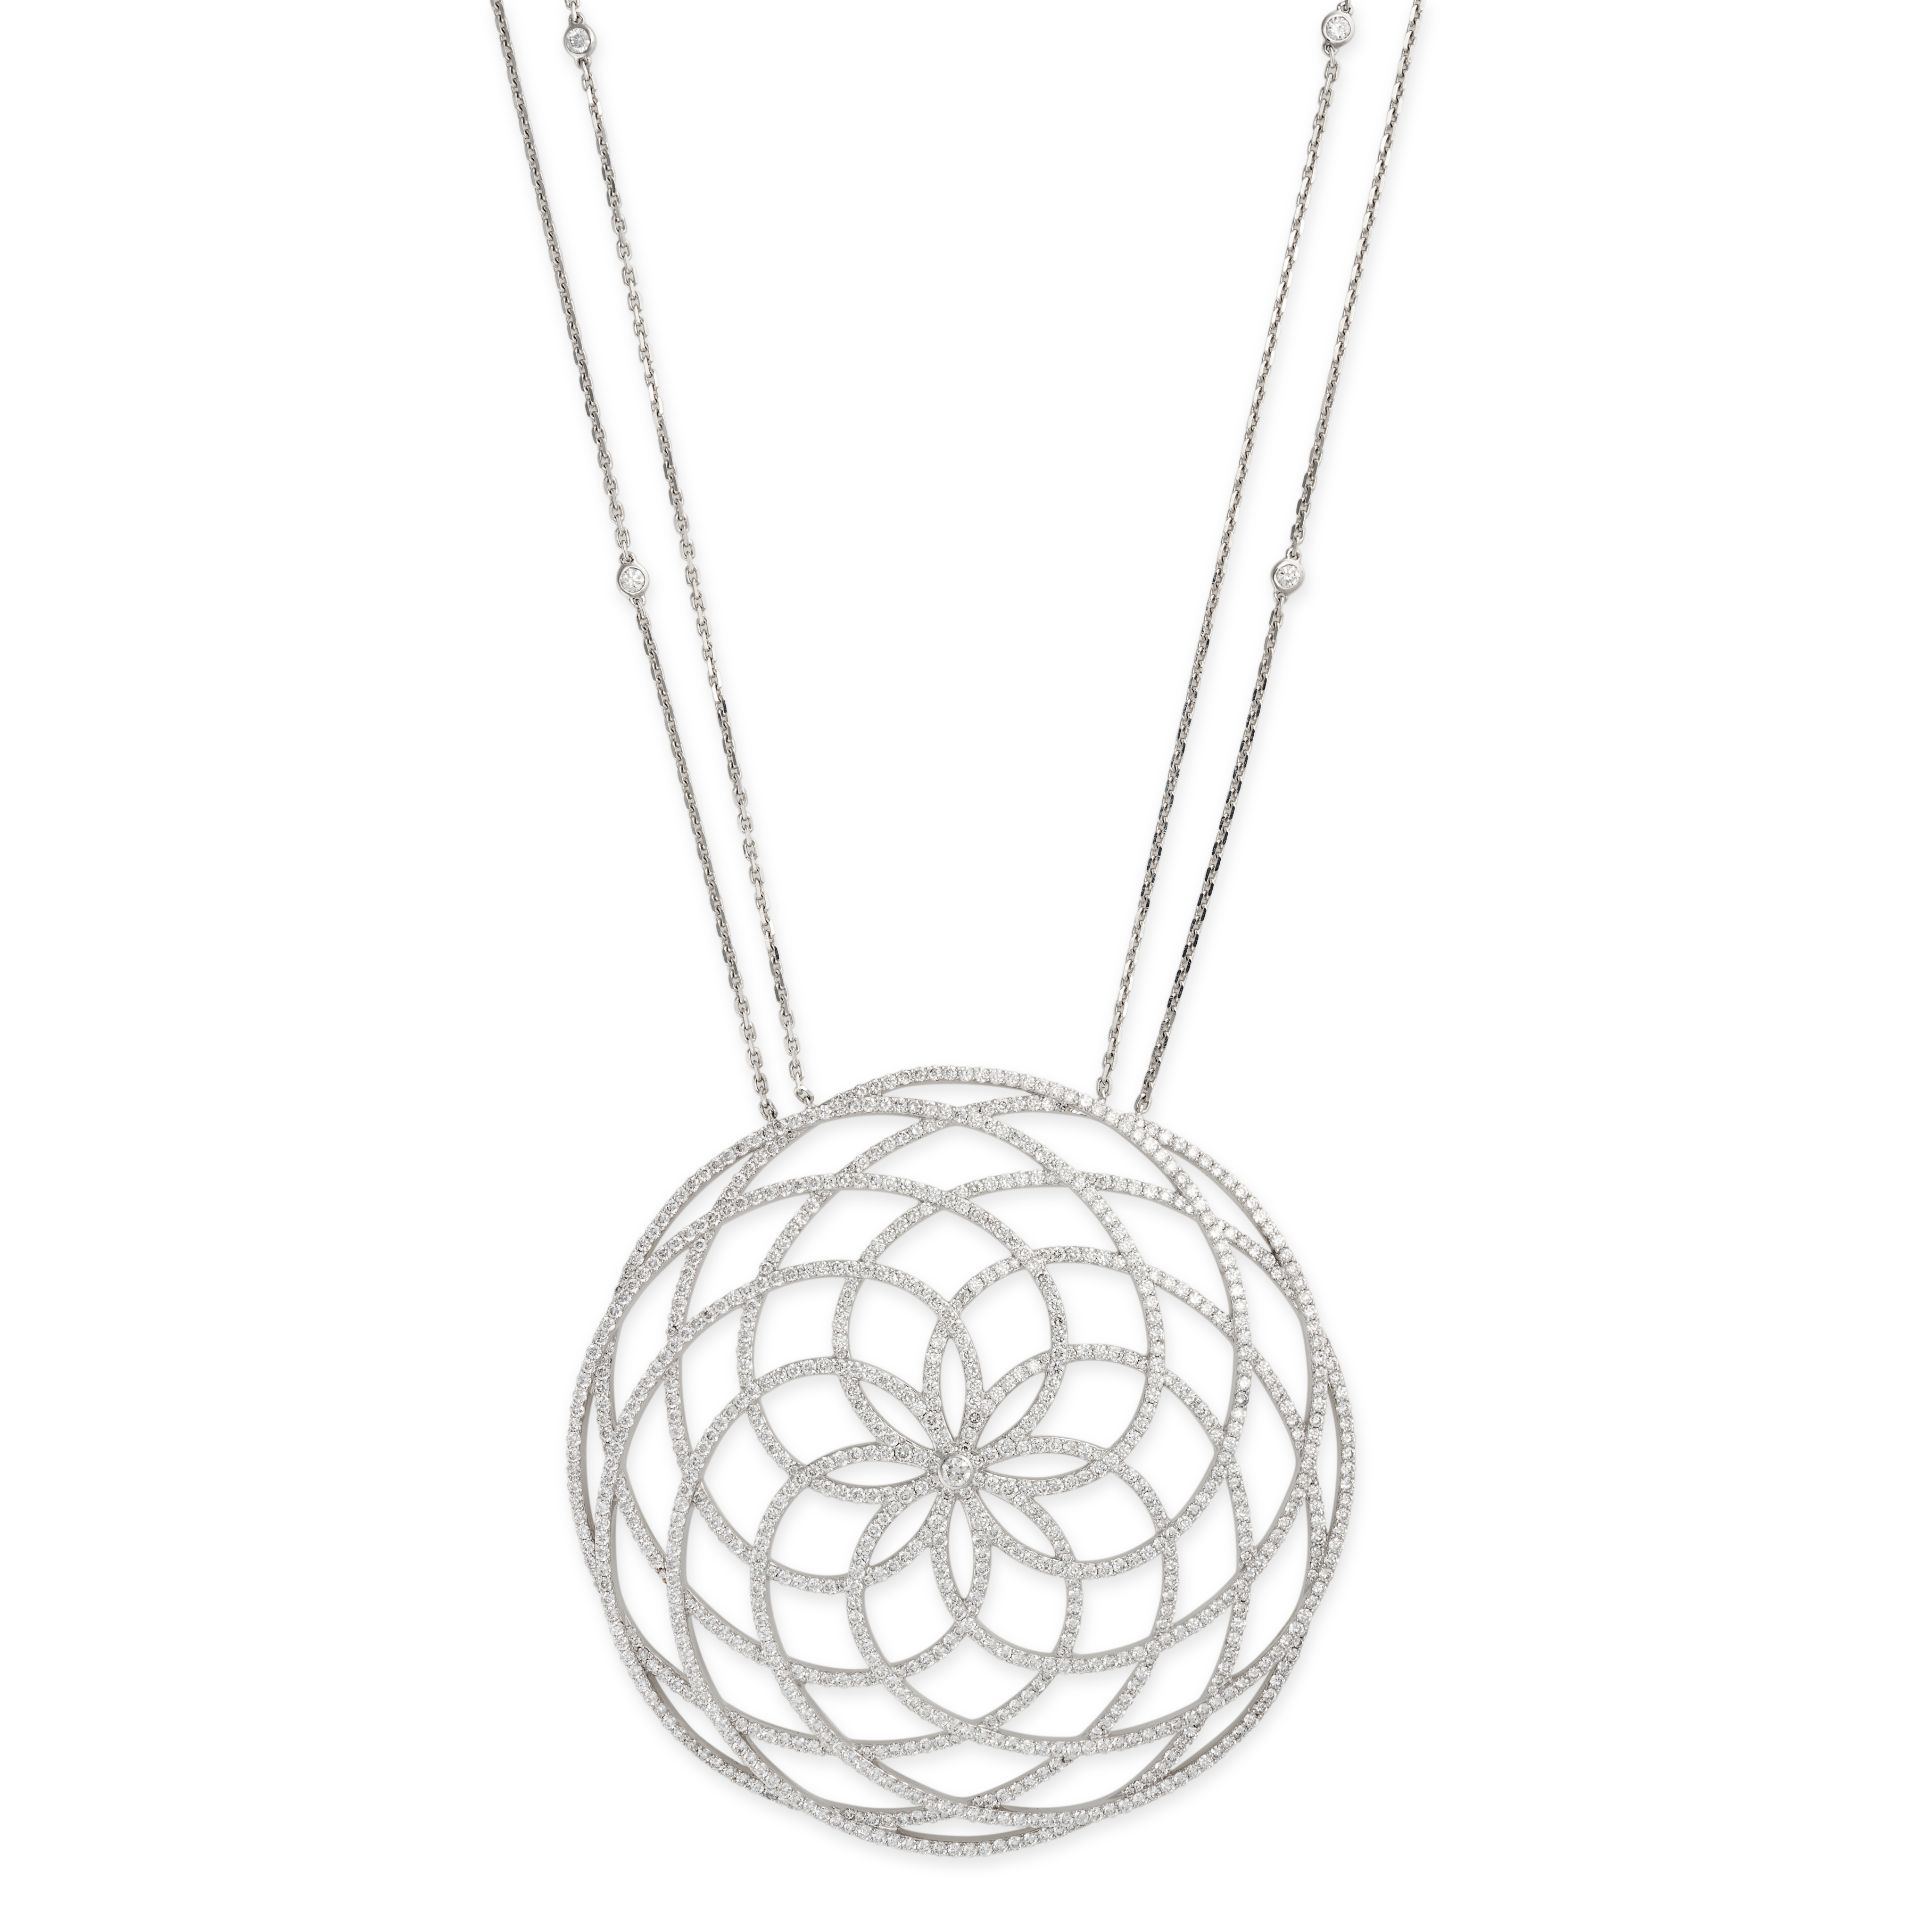 MESSIKA, A DIAMOND GATSBY PENDANT NECKLACE in 18ct white gold, the openwork pendant in a stylised...